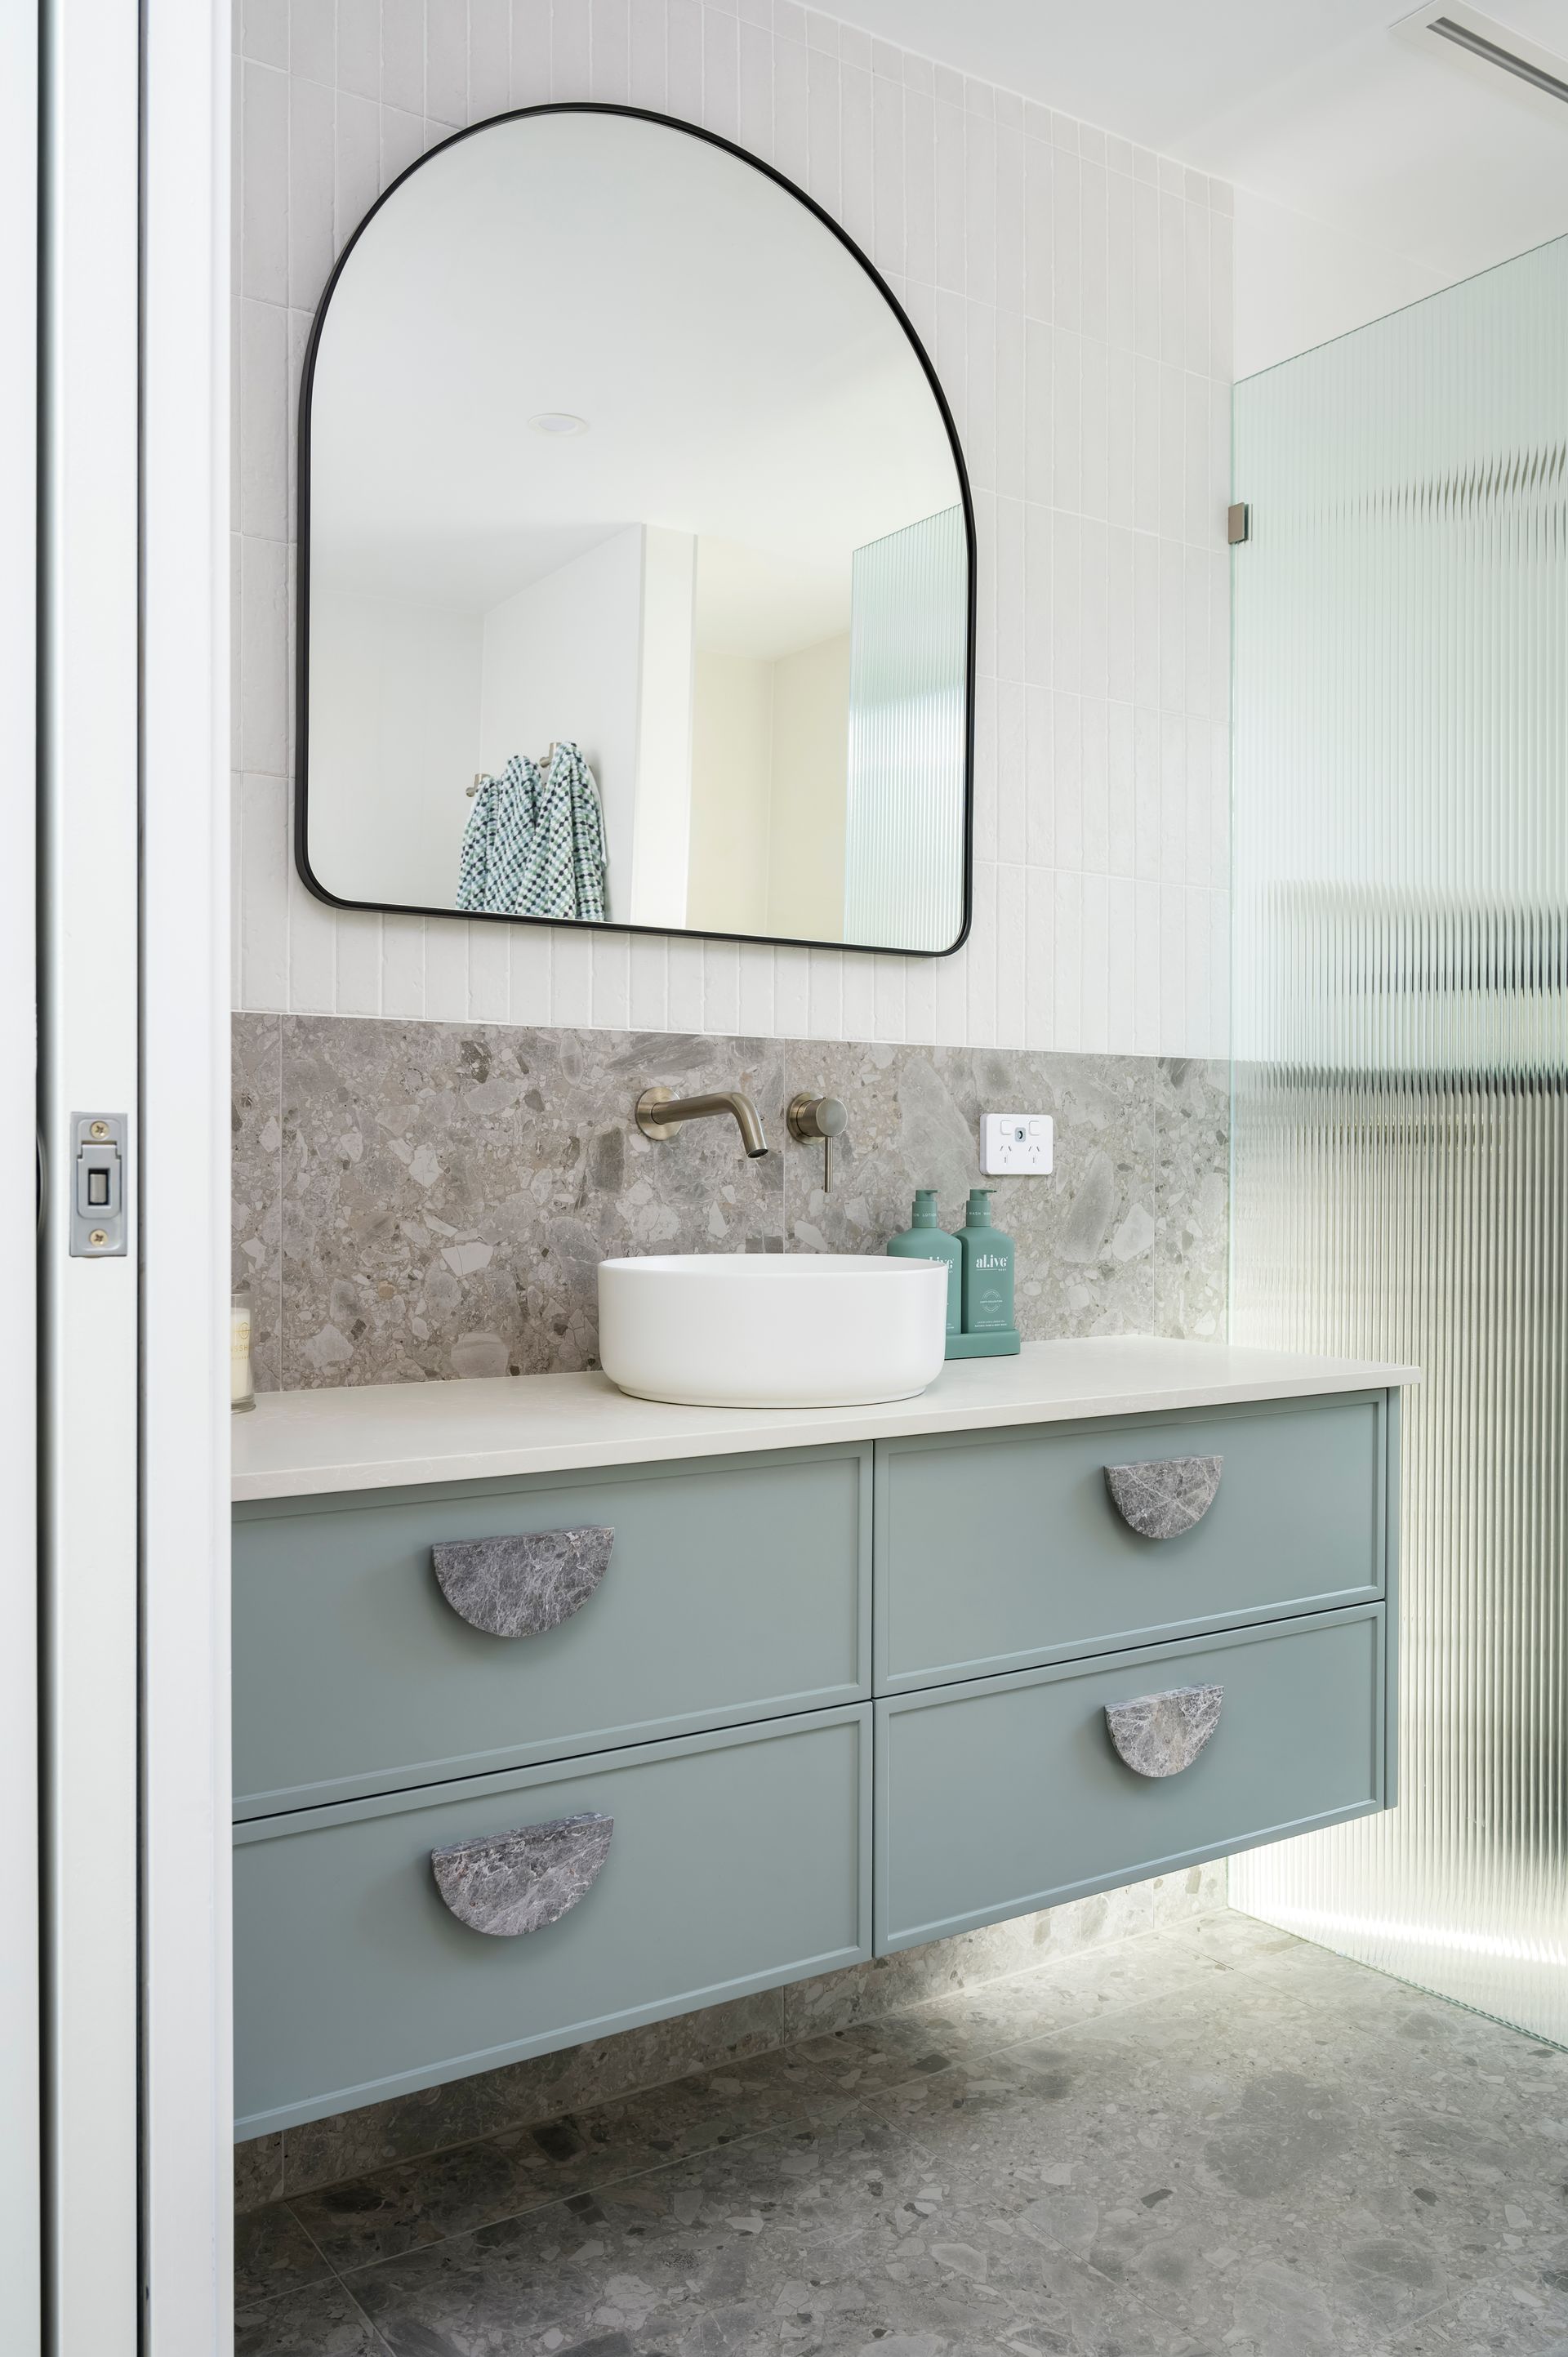 A bathroom vanity with an overmount white round sink, black framed arched mirror, and blue polyurethane drawers in a thin shaker profile with a grey marble half-moon handle. The shower features a frosted fluted glass freestanding screen.